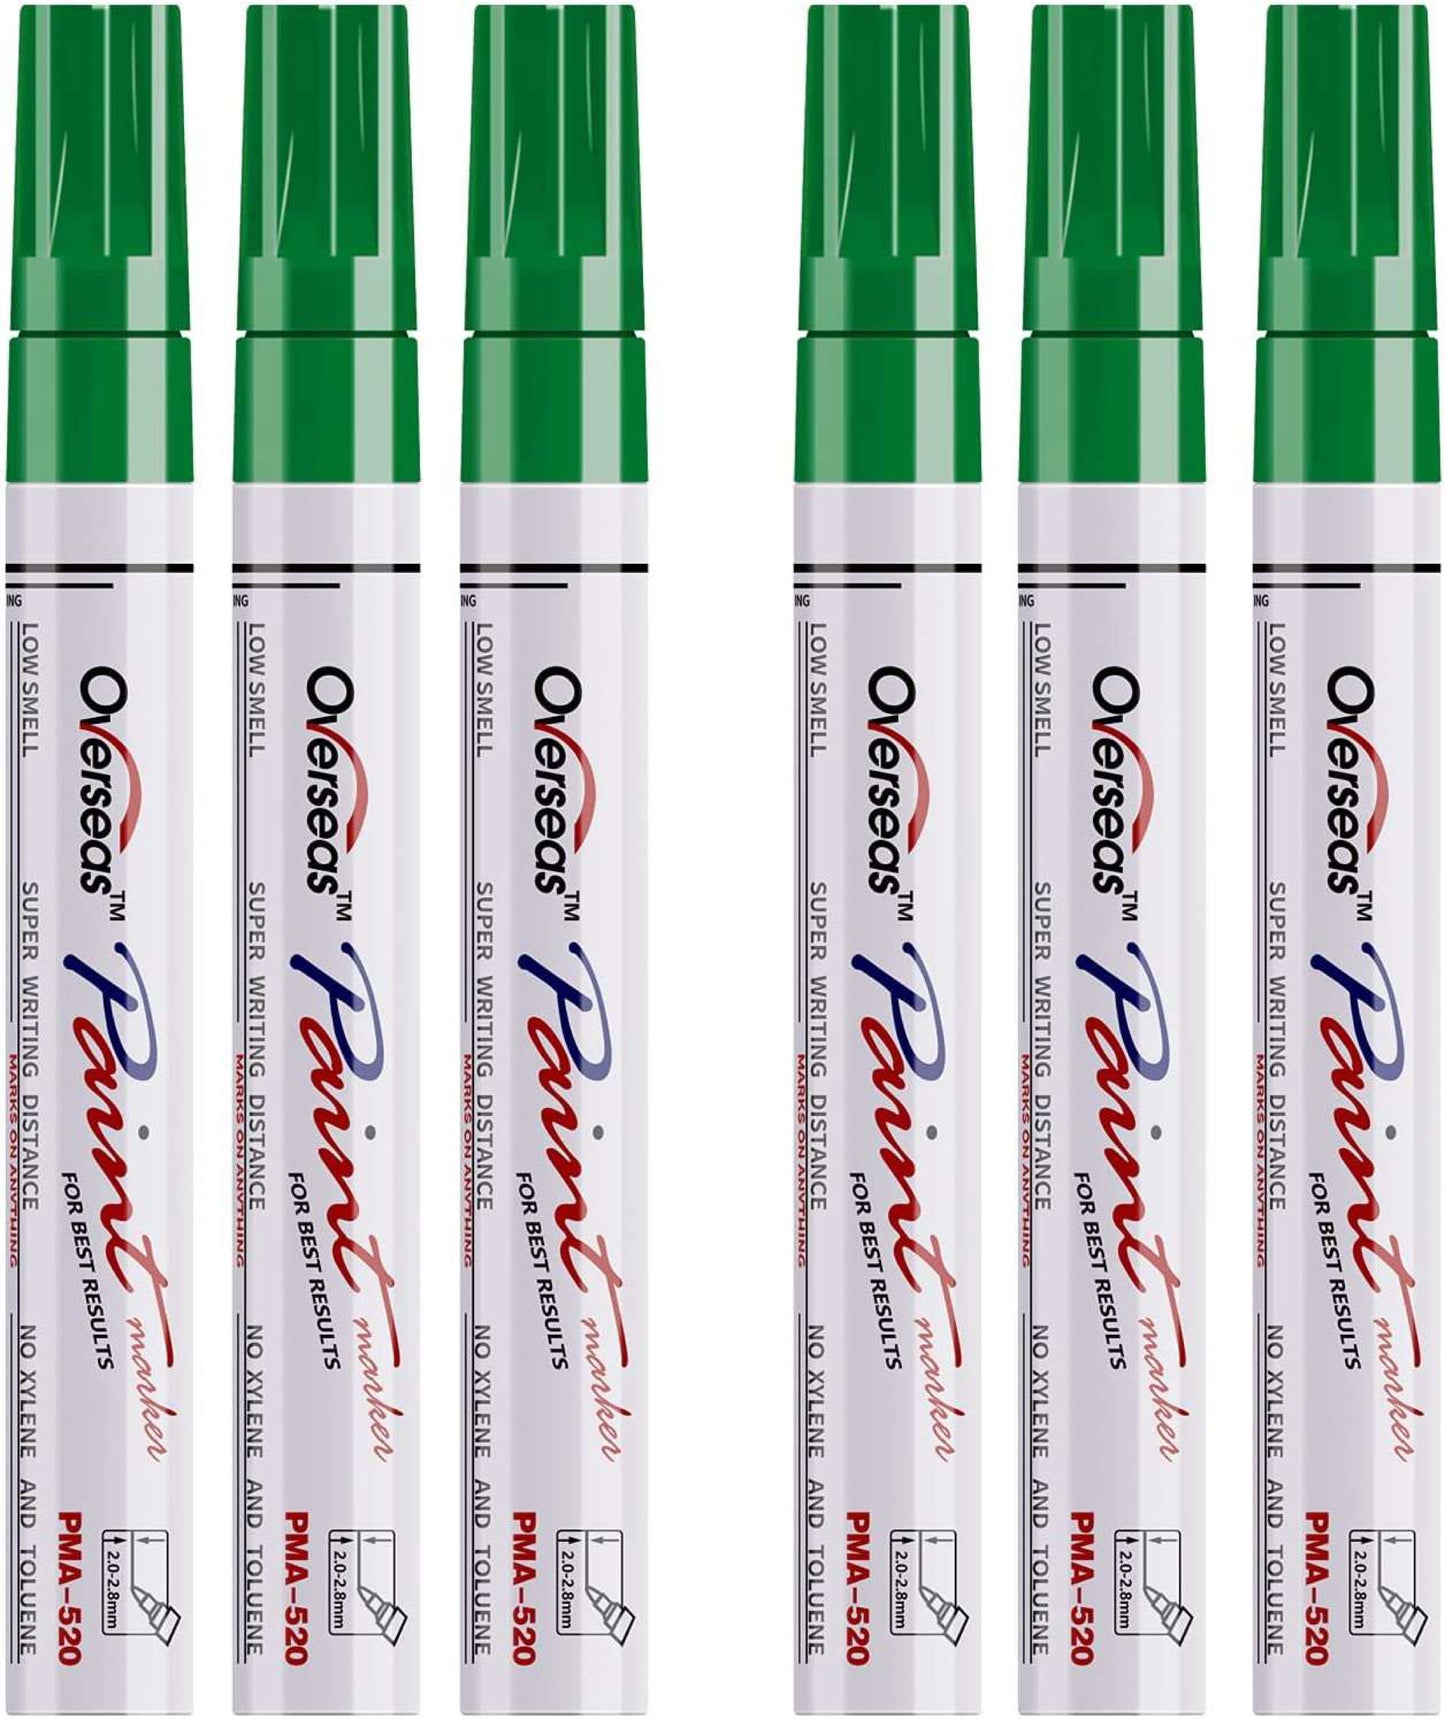 Tyre Permanent Paint Marker - Green